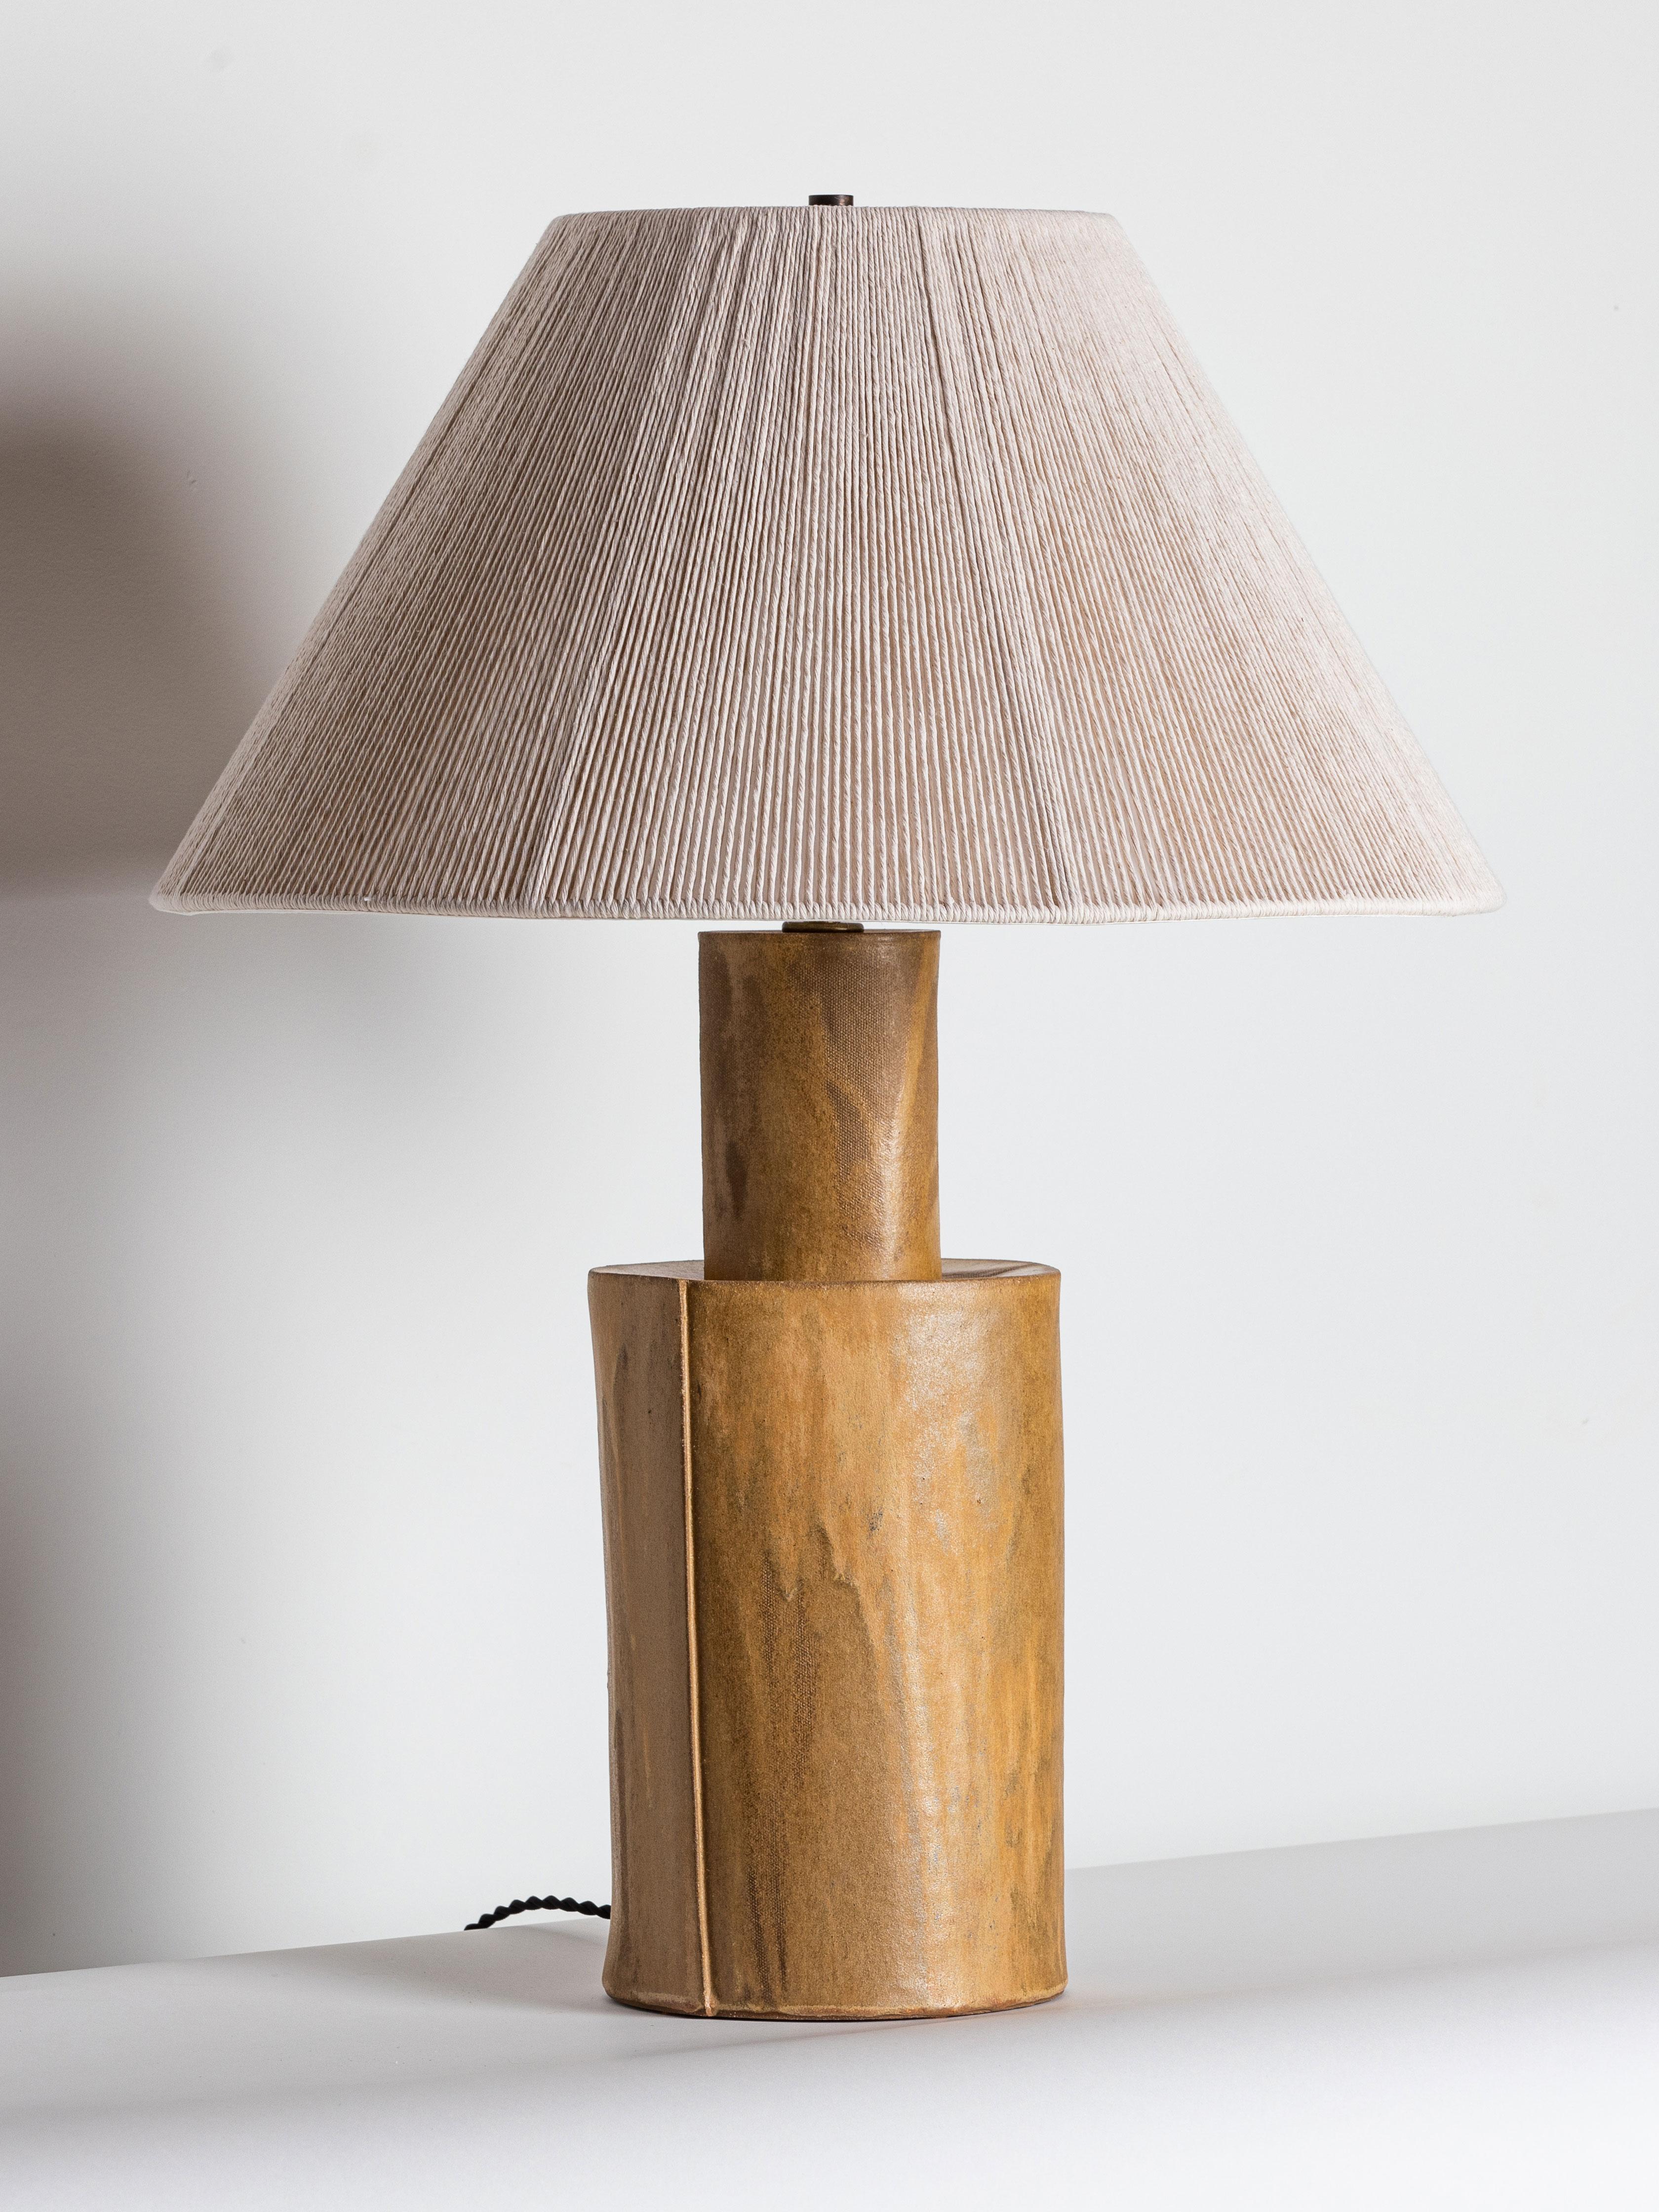 Our stoneware Cistern Lamp is handcrafted using slab-construction techniques.

FINISH

- Poured glaze, pictured in hide
- Antique brass fittings
- Twisted black-cloth cord
- Full-range dimmer socket
- String shade

BULB

60-watt frosted